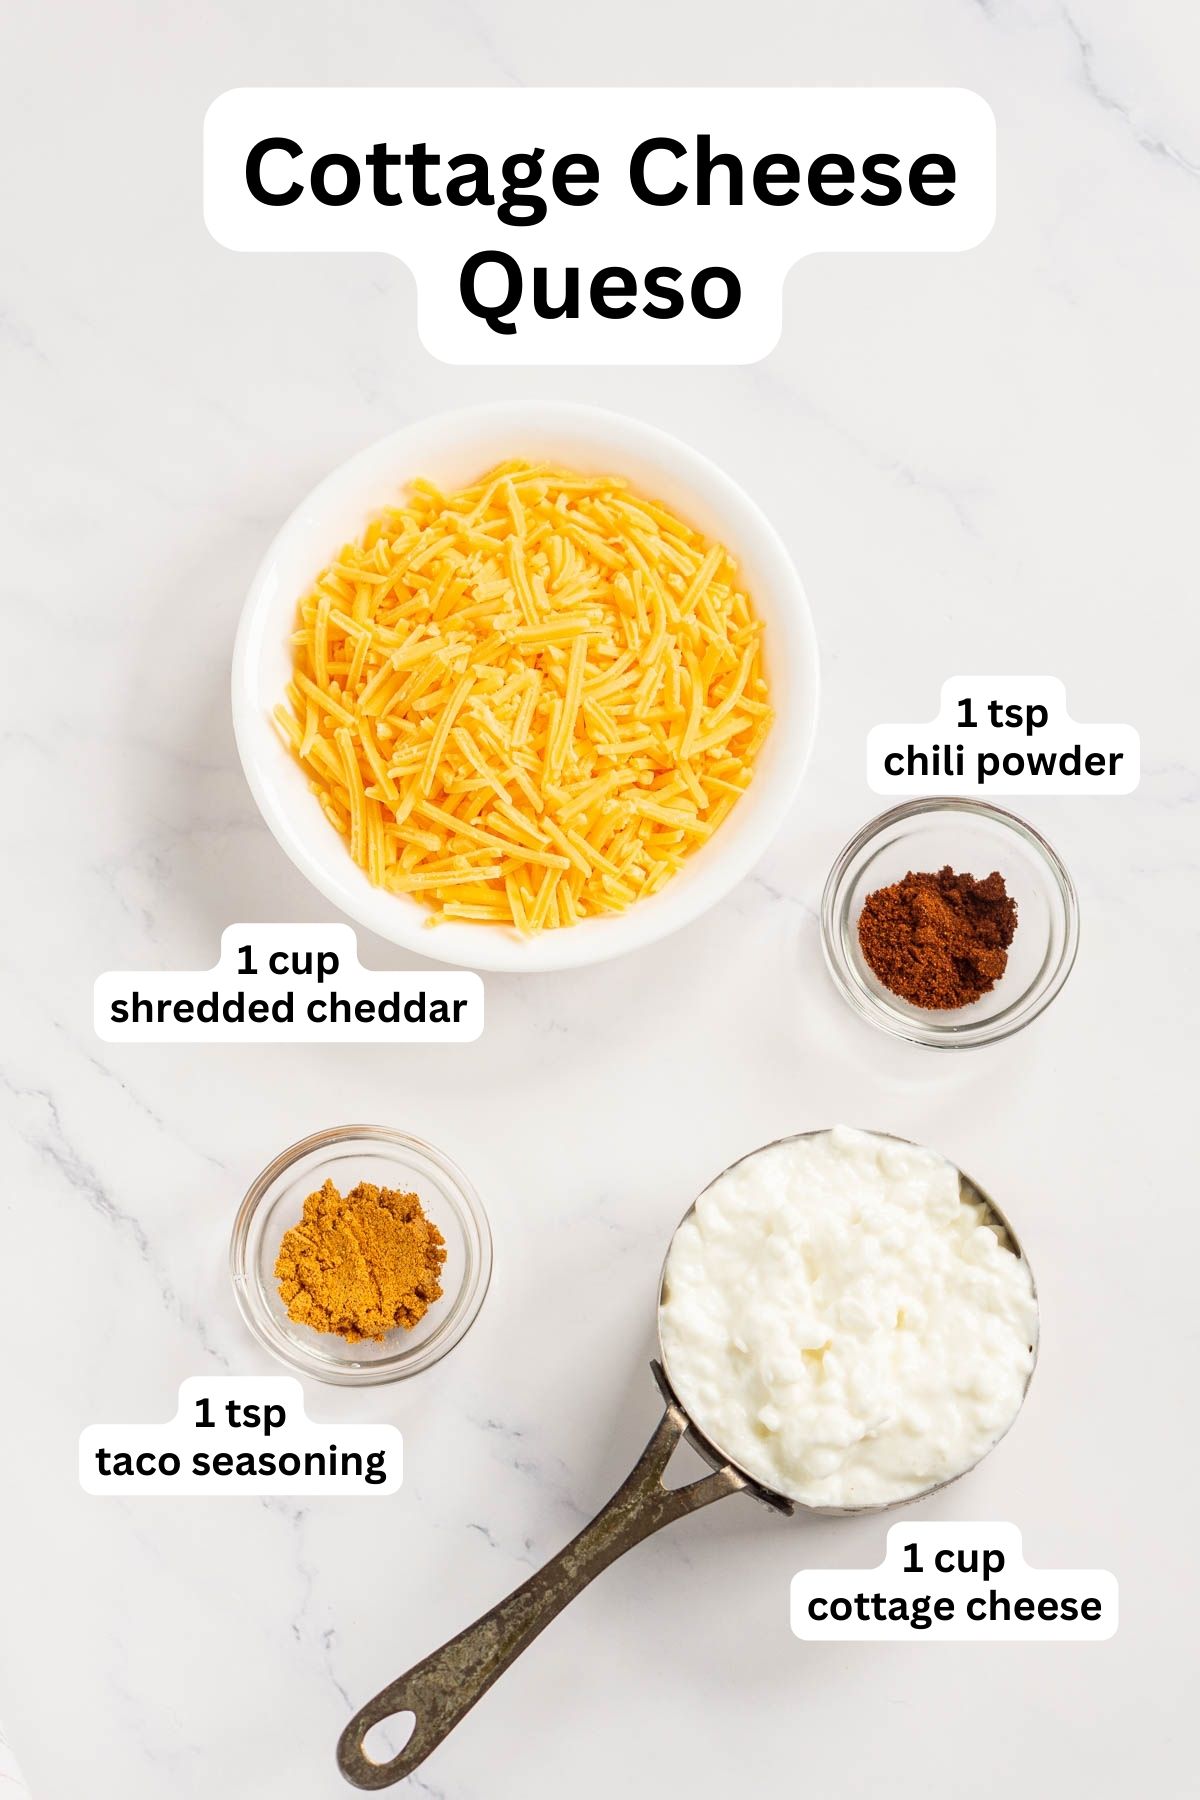 Ingredients to make blended cottage cheese queso